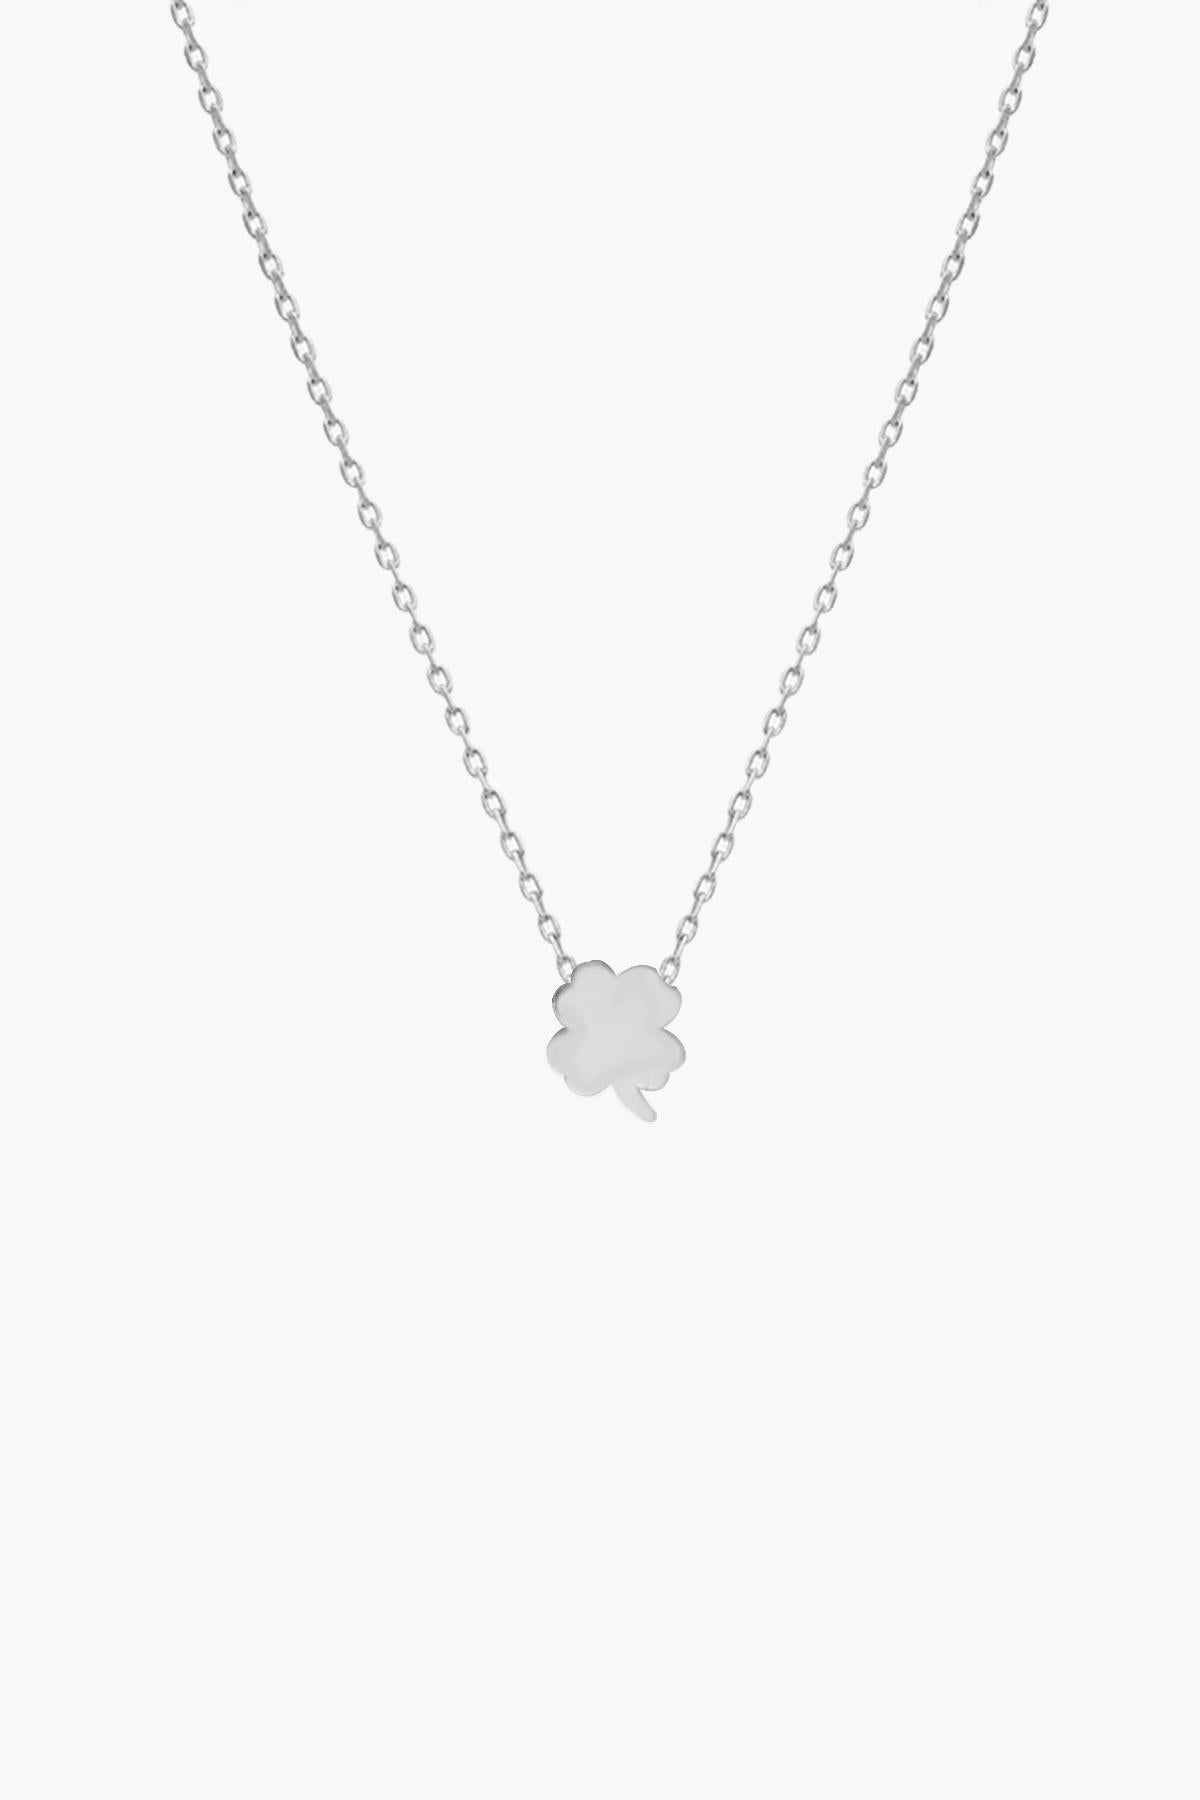 Luck Clover Necklace 925 Sterling Silver